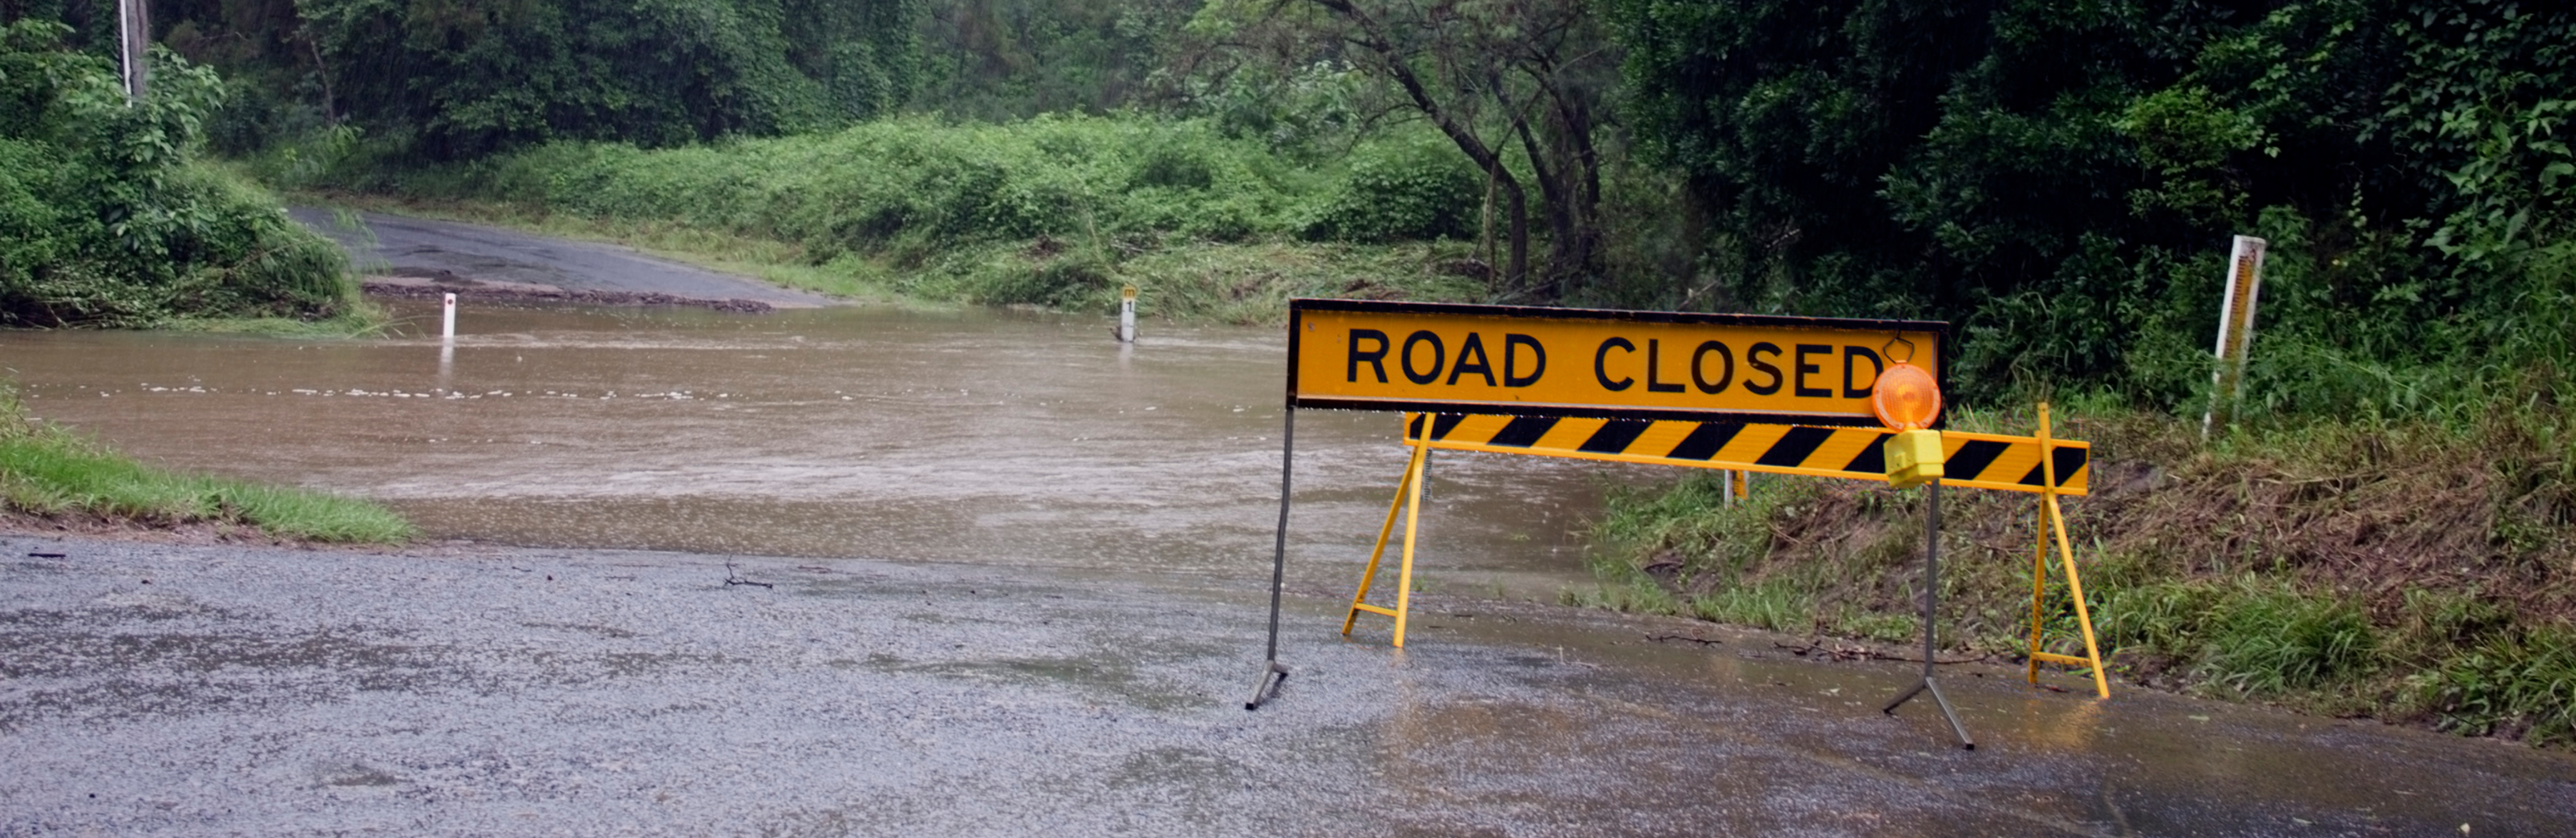 Road-closed-water-over-road.png